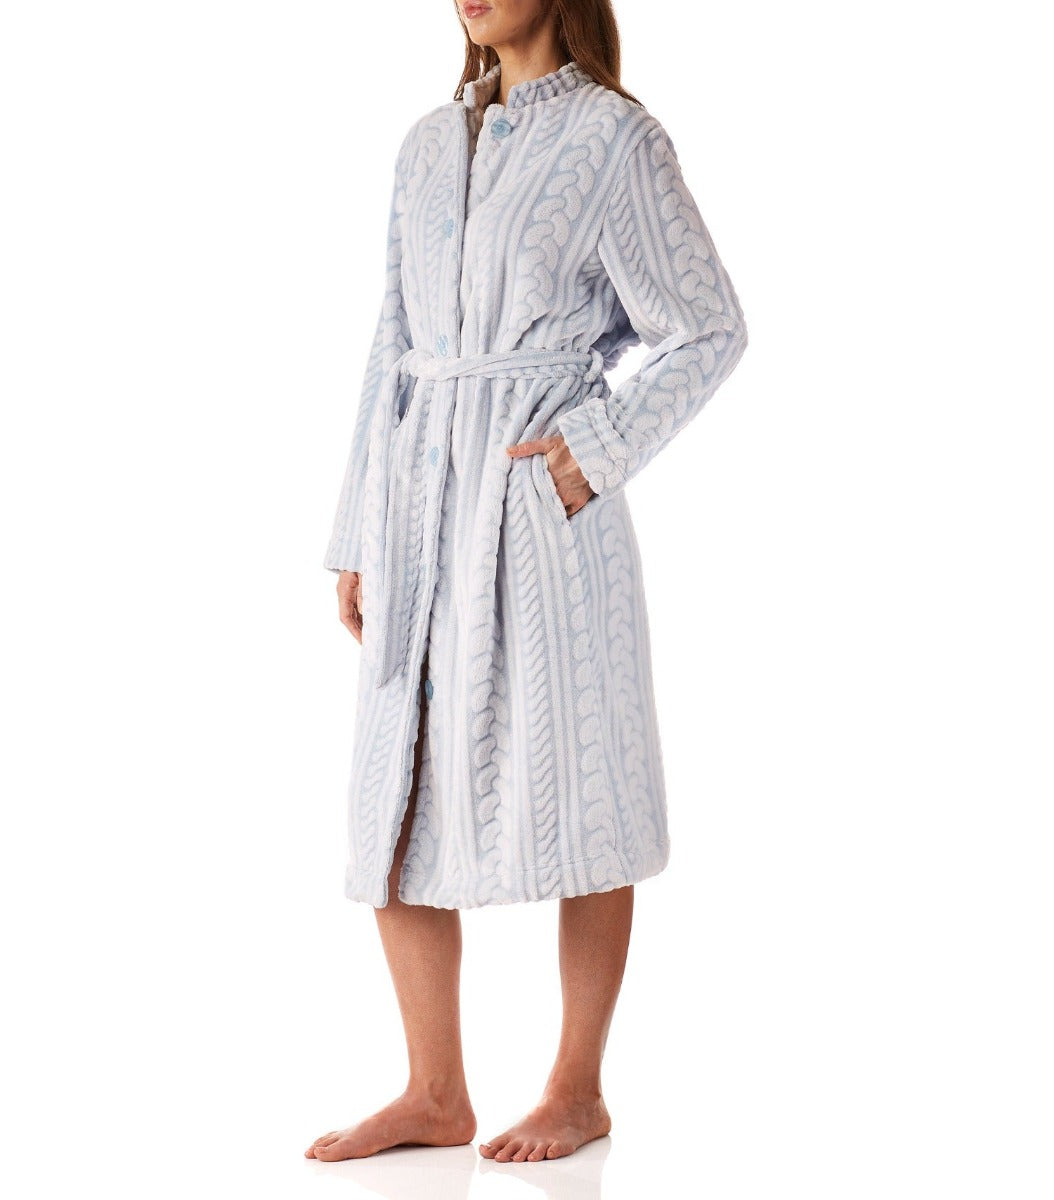 The Best Luxury Bathrobes Australia: From Monogrammed to Extra Fuffy